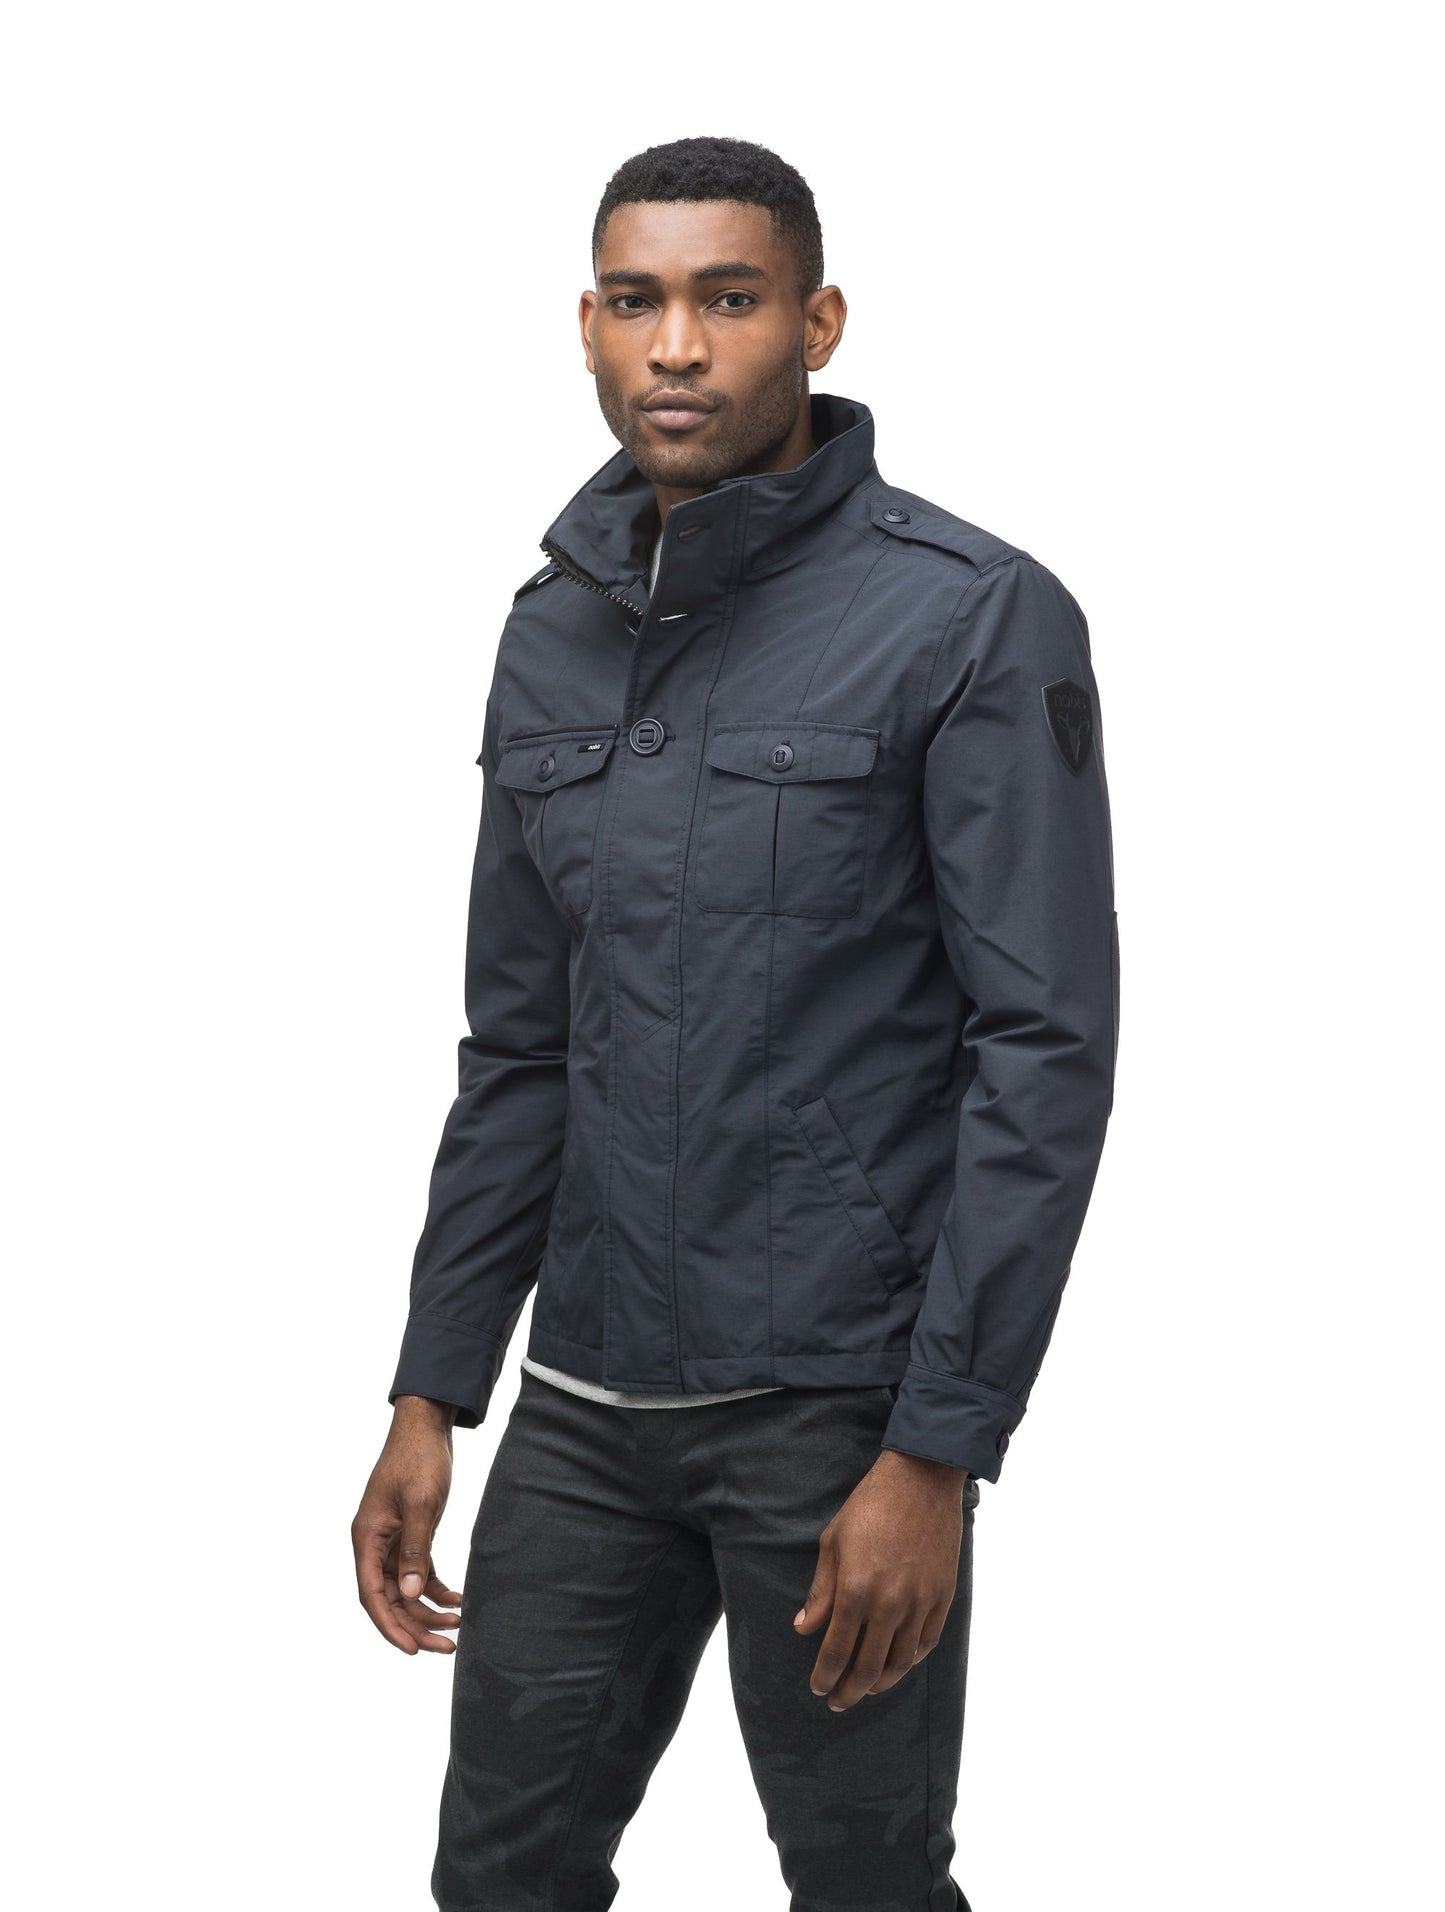 Men's waist length military style jacket in Navy